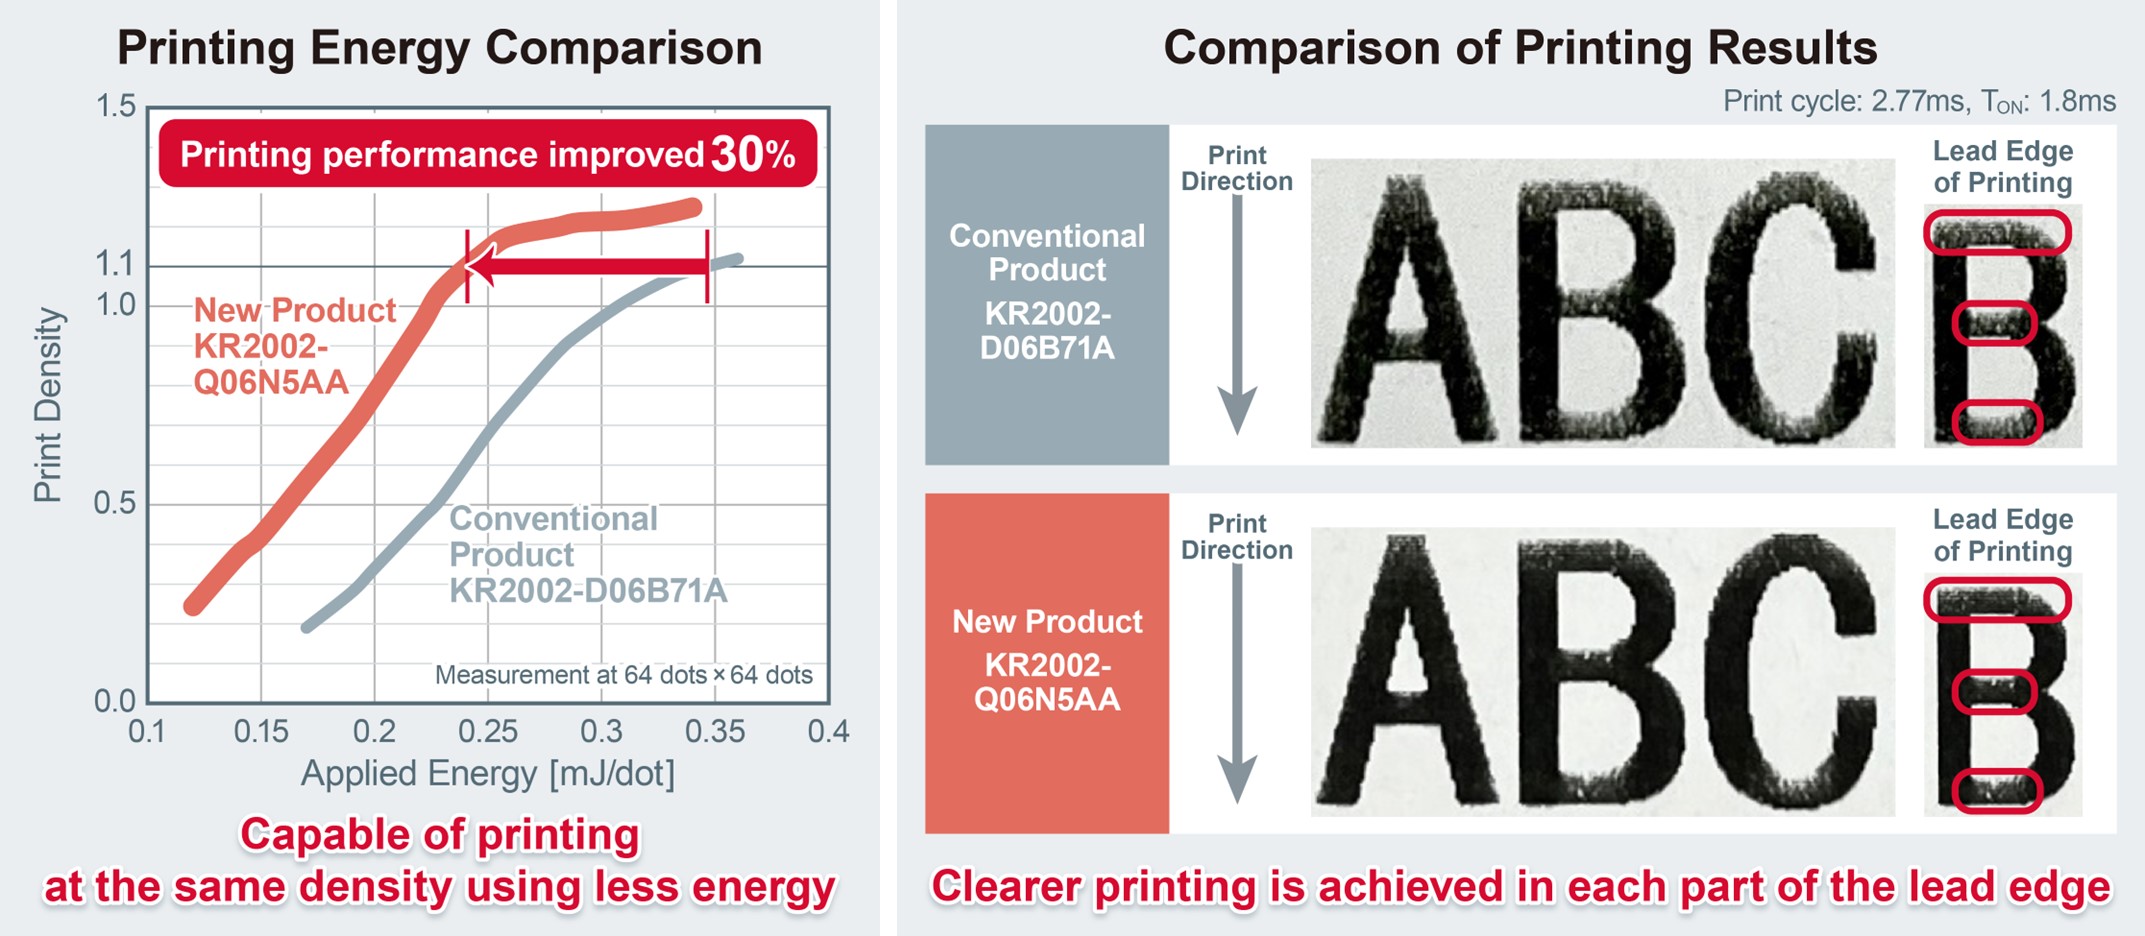 Printing Energy and Printing Results Comparison